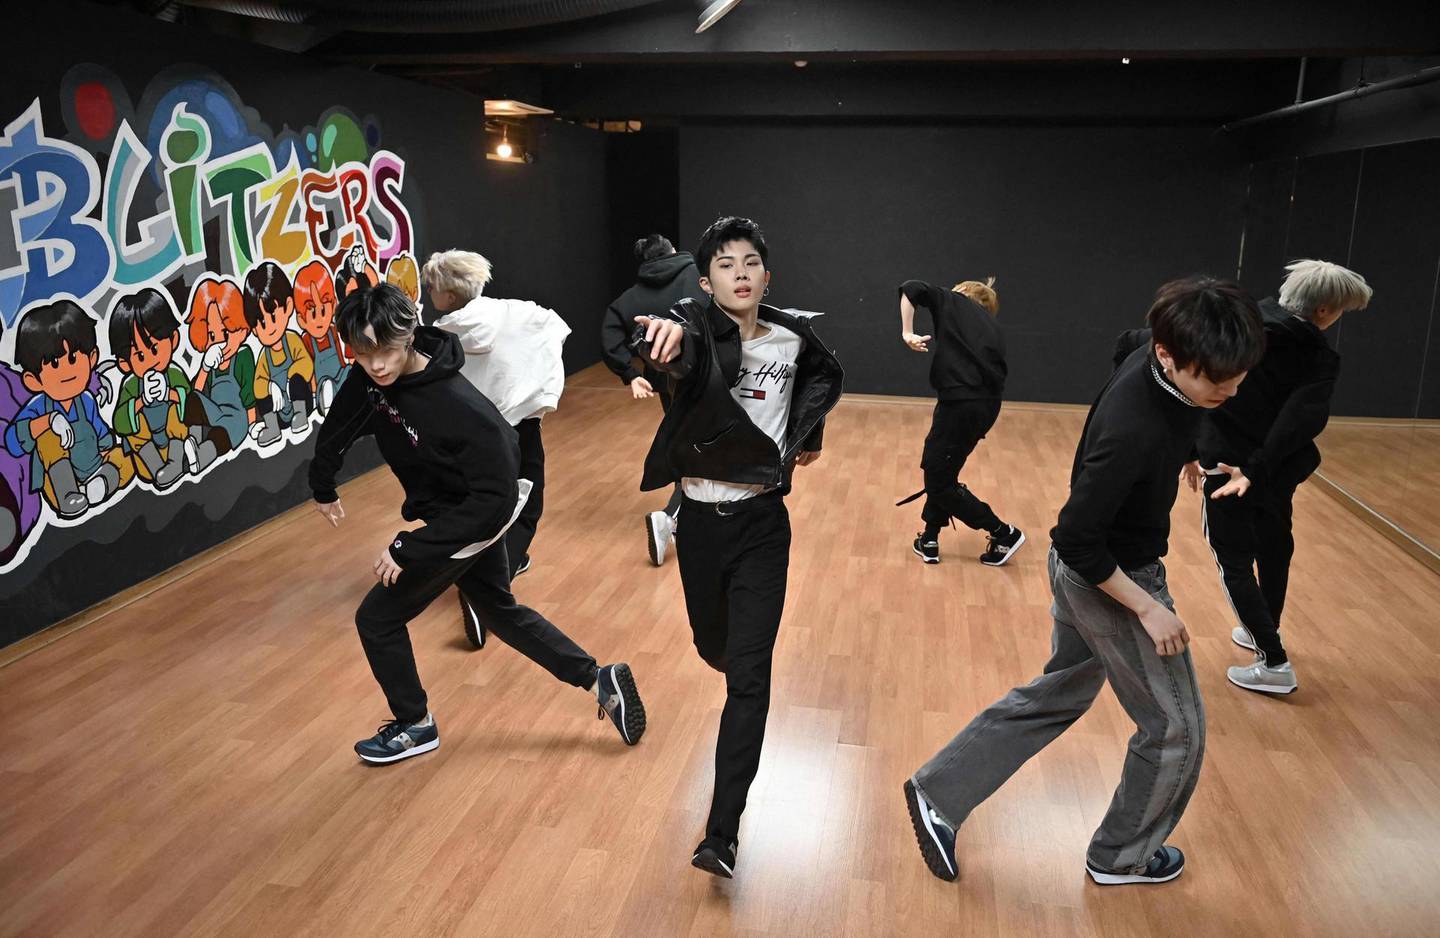 This picture taken on April 29, 2021 shows members of the K-pop boy band Blitzers performing during their dance practise session at a rehearsal studio in Seoul. Thirty teenagers, thousands of hours of training, dozens of shattered dreams: it all comes to a head next week when the Blitzers will be launched into the cut-throat K-pop market, hoping to become the next BTS. - TO GO WITH SKorea-music-social-entertainment-Kpop,FOCUS by Kang Jin-kyu
 / AFP / Jung Yeon-je / TO GO WITH SKorea-music-social-entertainment-Kpop,FOCUS by Kang Jin-kyu
